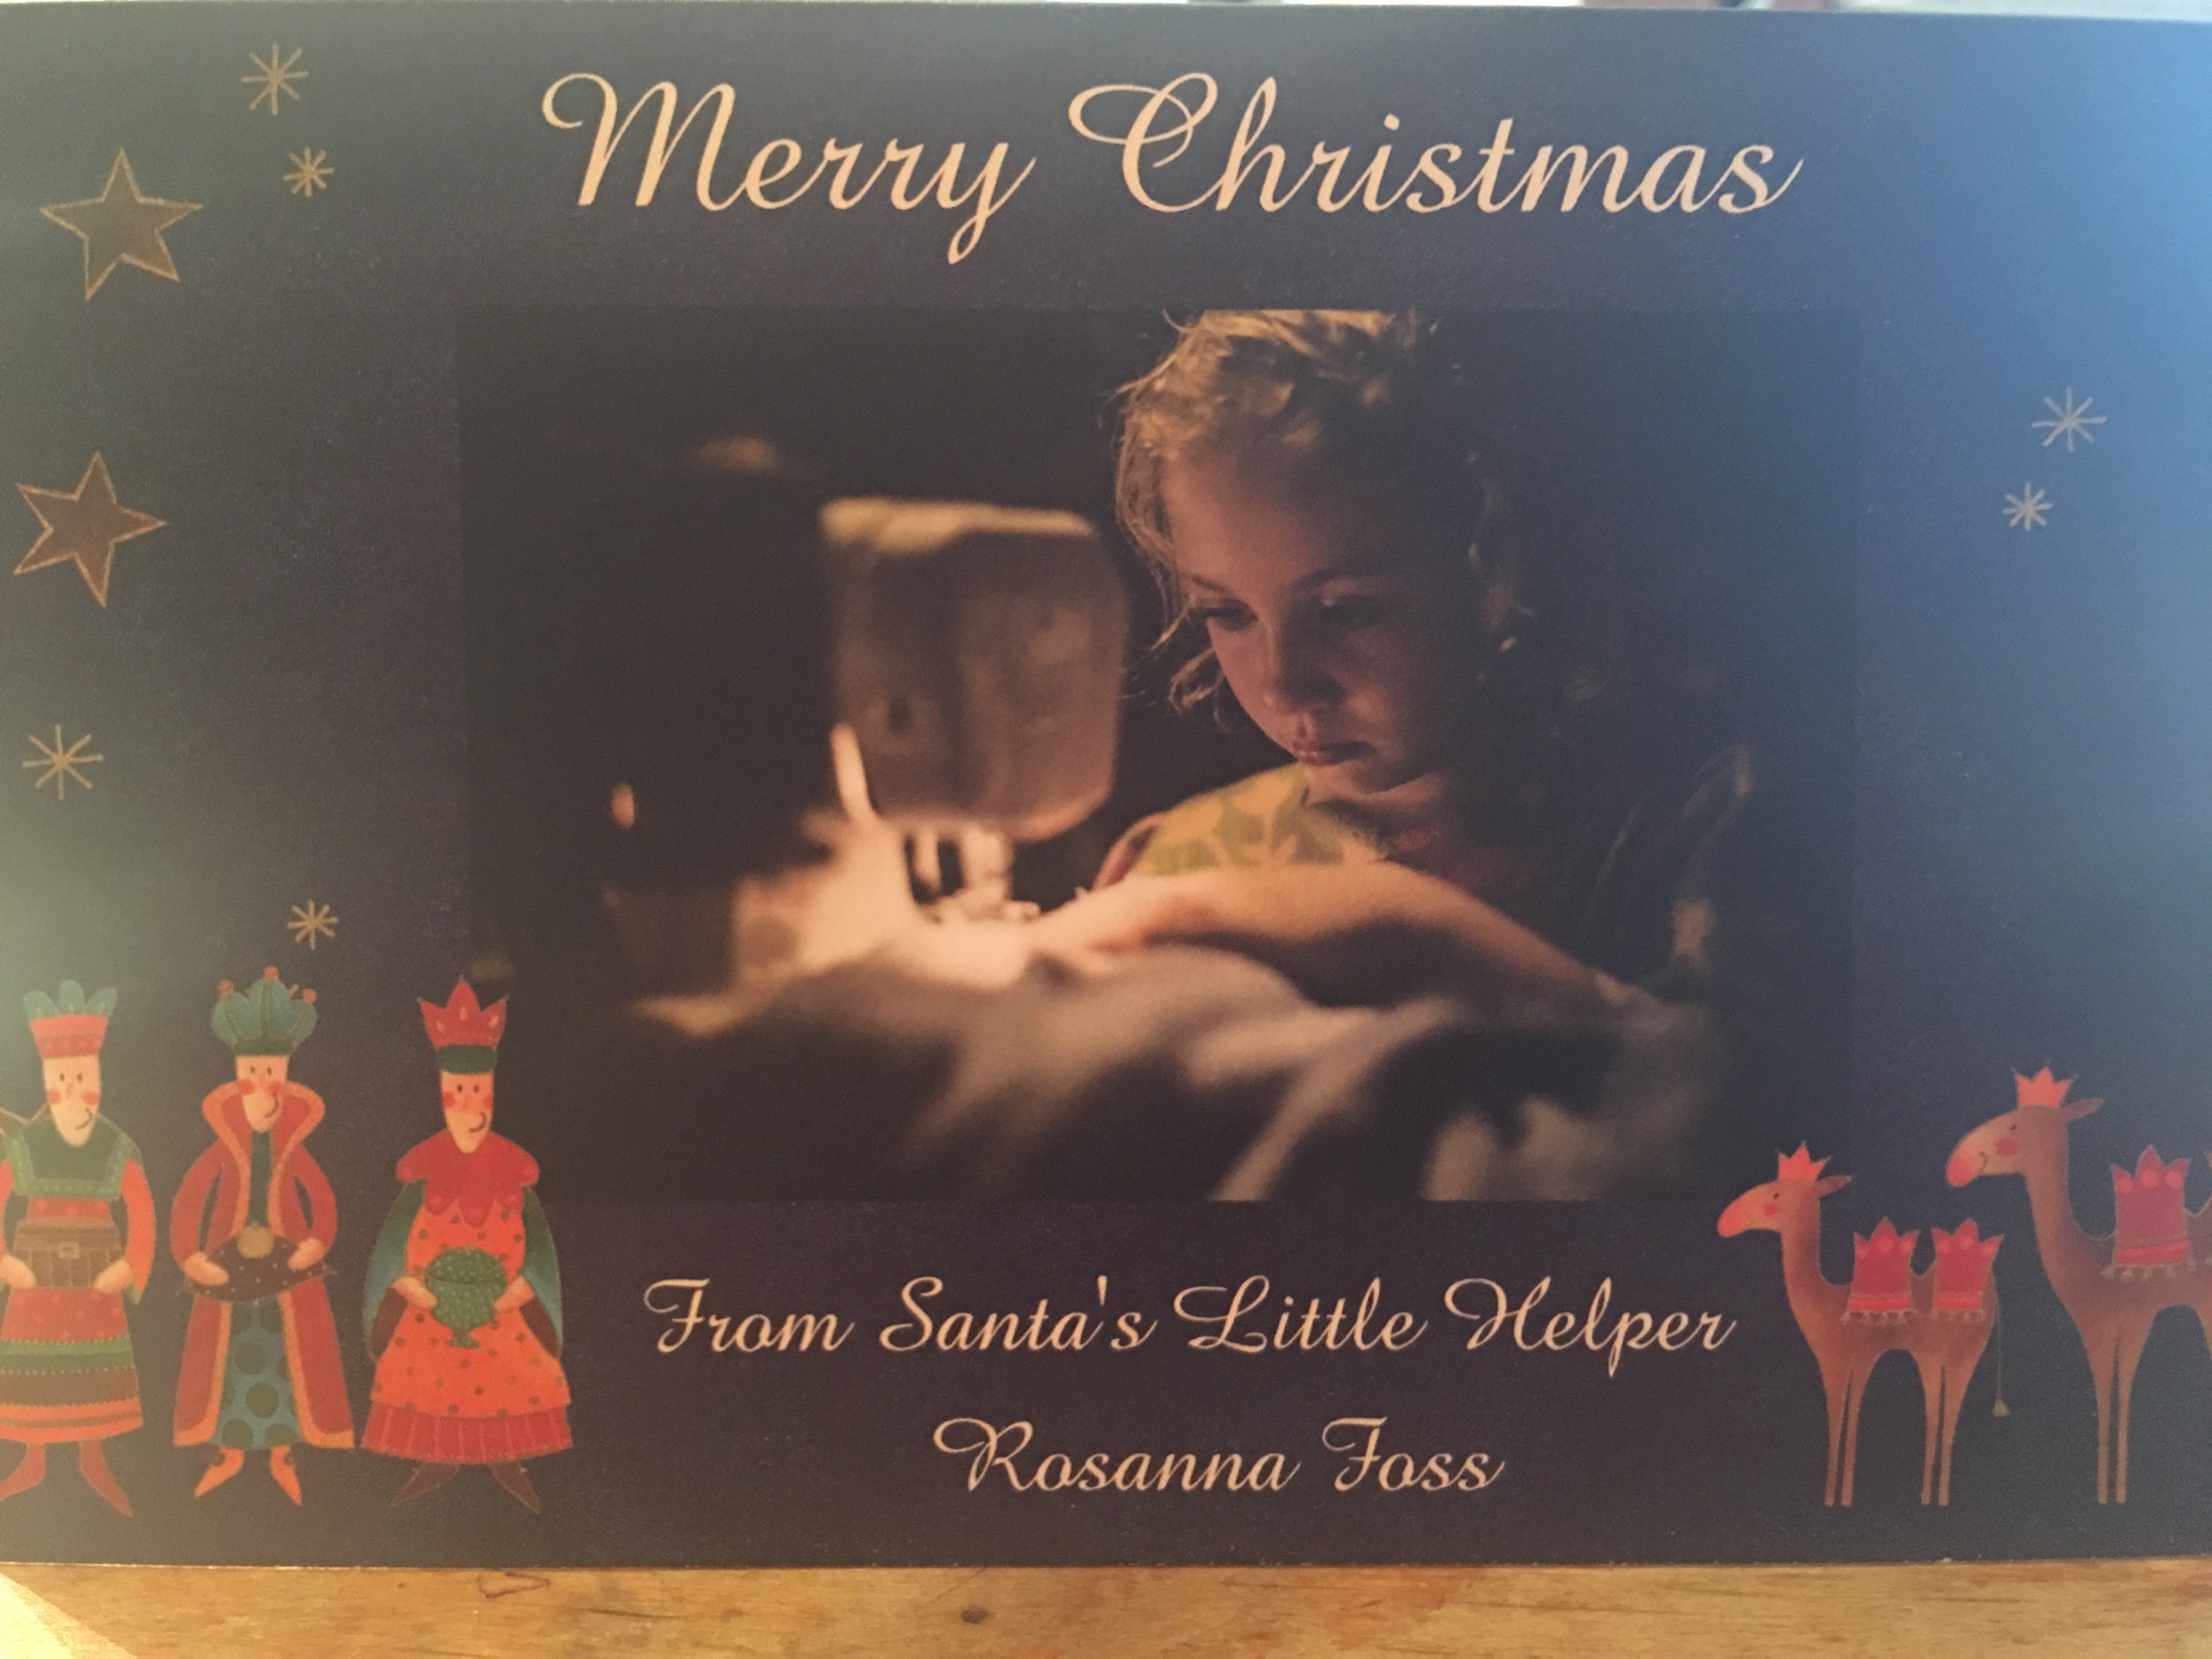 Christmas 2016 Rose made VERY SPECIAL for 60 boys and girls at Los Angeles Children's Hospital. She hand made and personally delivered 30 very soft blue robes for boys and 30 very cozy pink robes for girls at LACH.Each box had a personalized card.